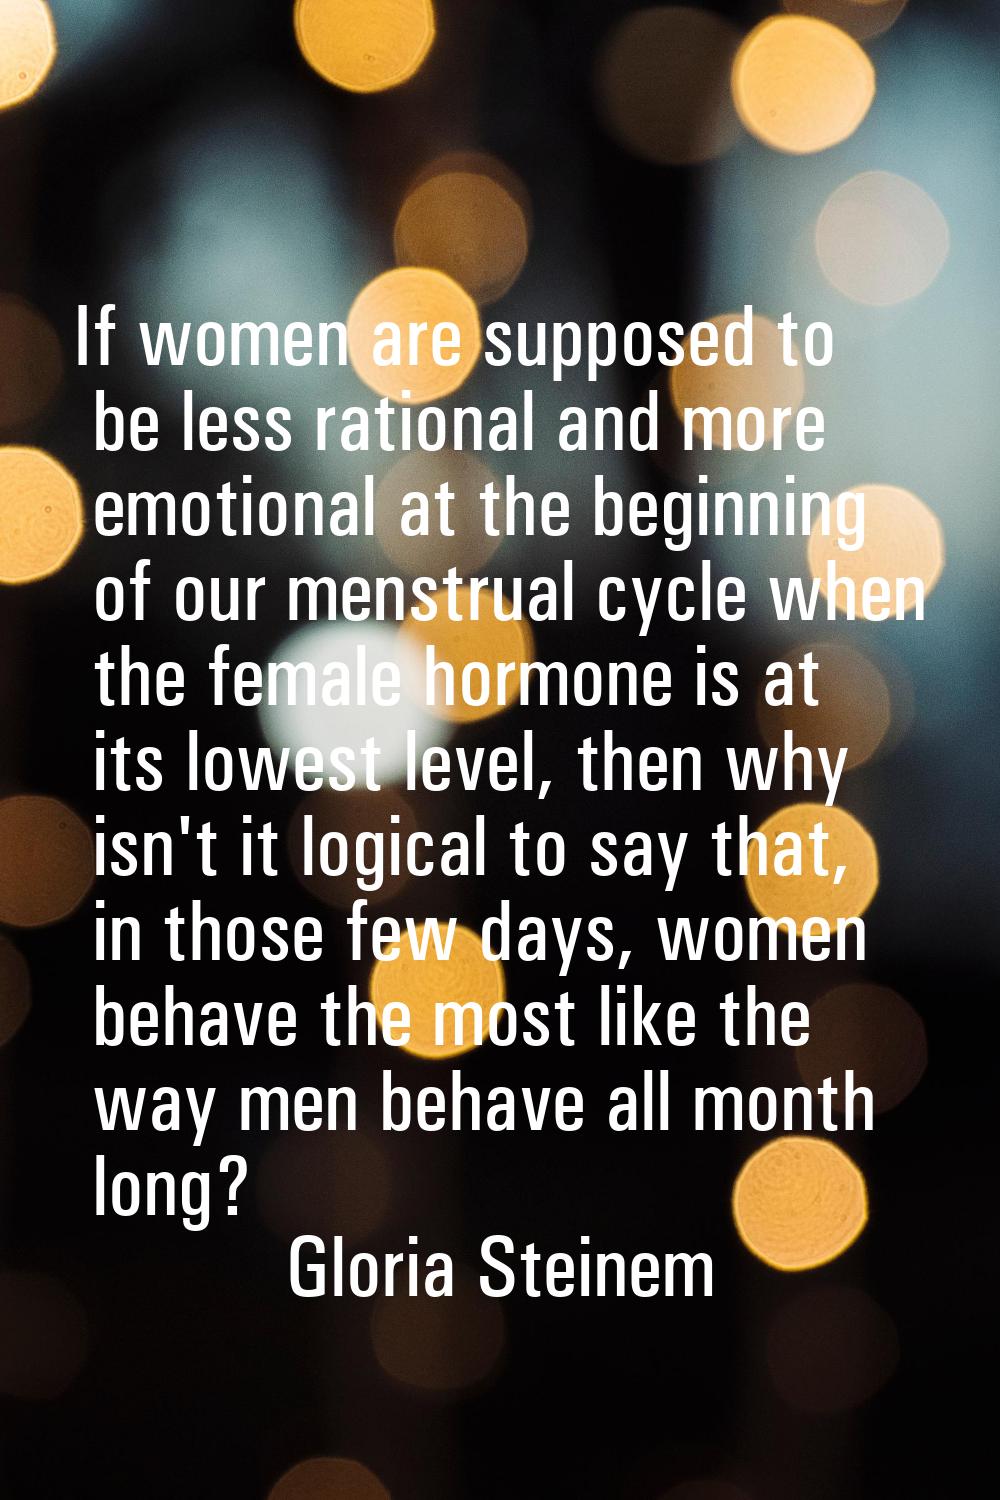 If women are supposed to be less rational and more emotional at the beginning of our menstrual cycl